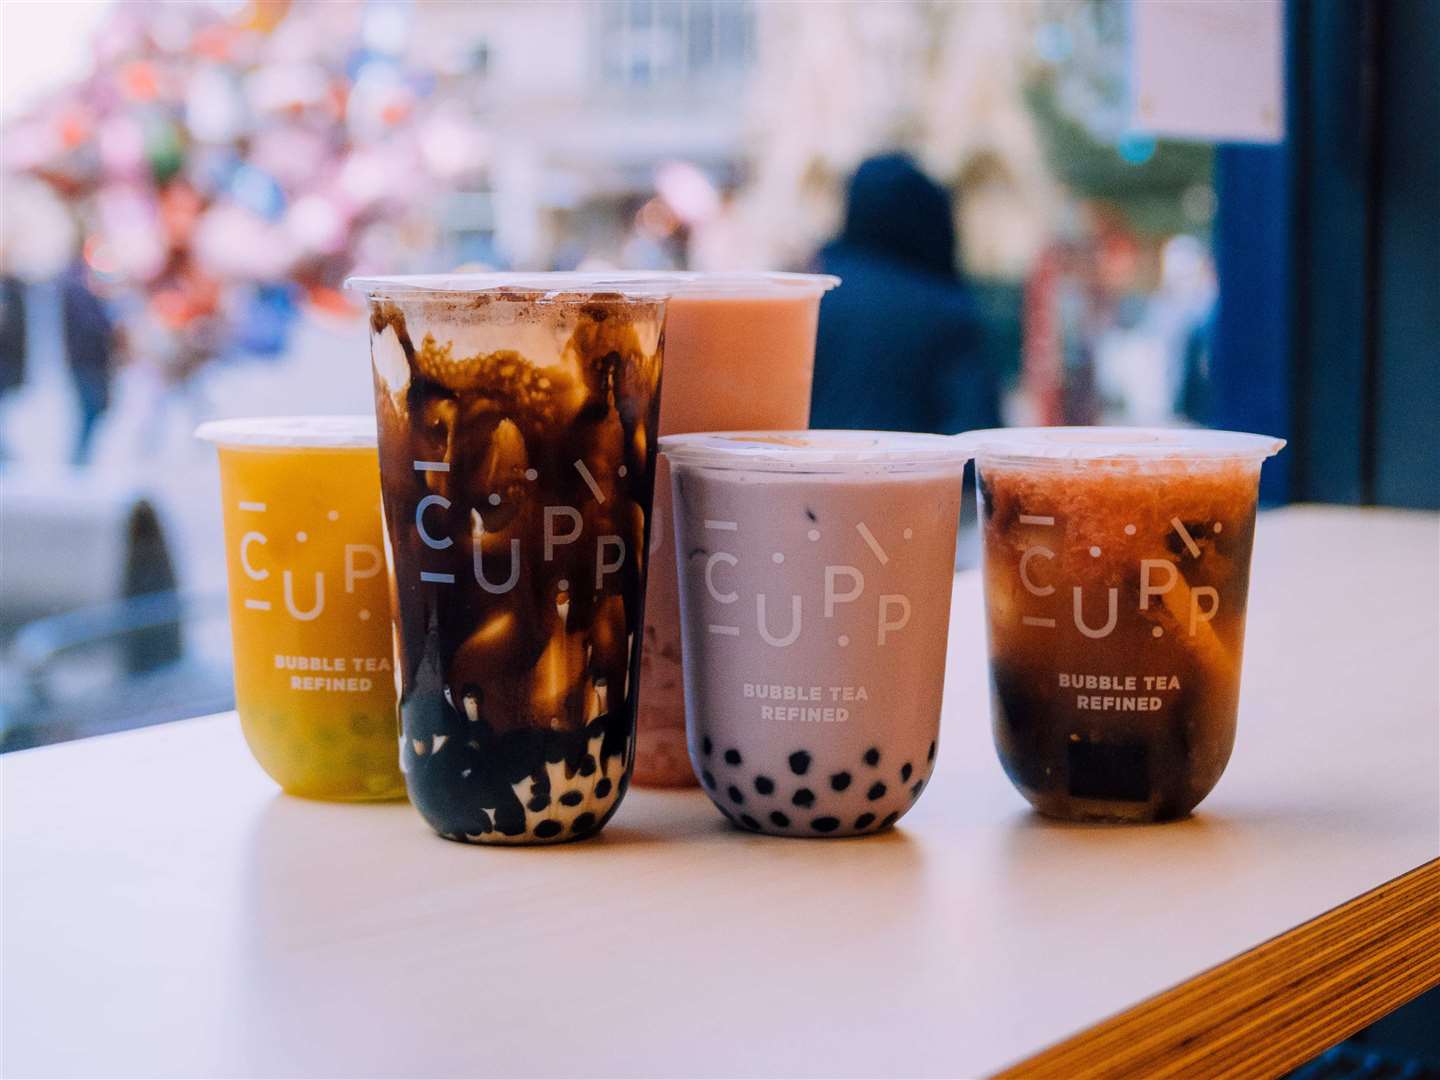 The store will serve a variety of tasty bubble teas. Picture: CUPP Bubble Tea